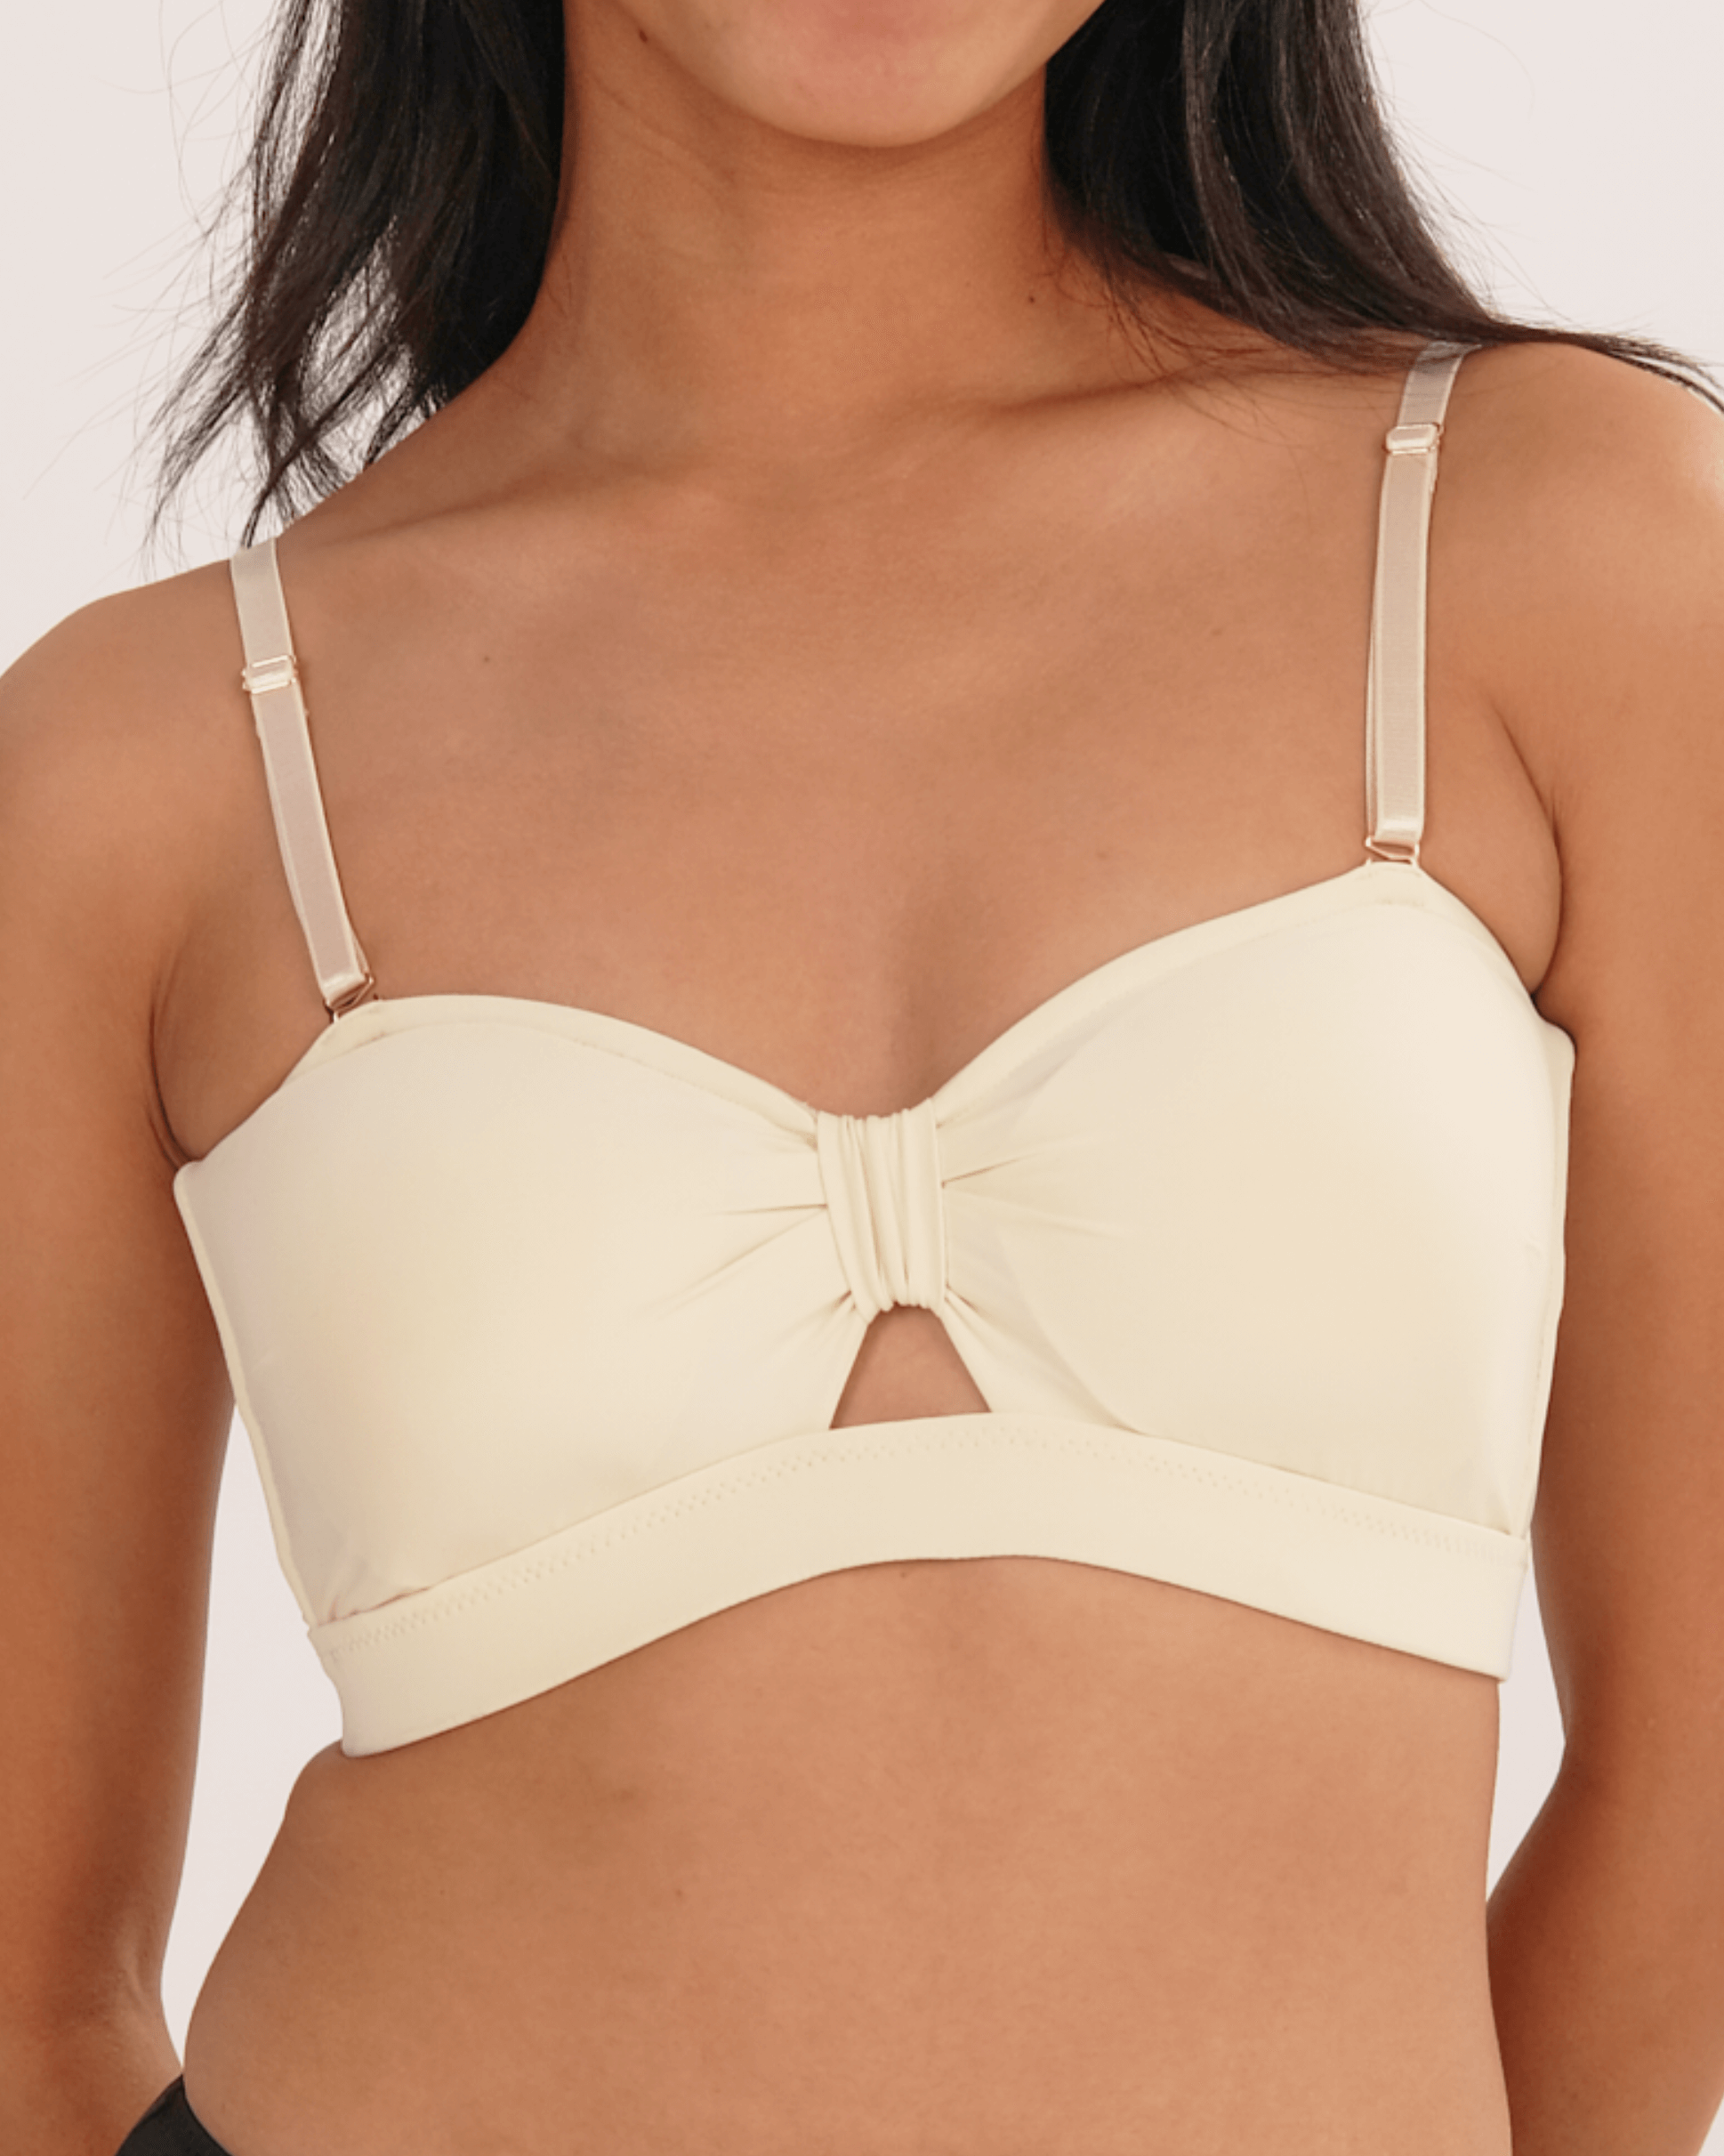 knotty padded strapless bralette in #14 – Our Bralette Club